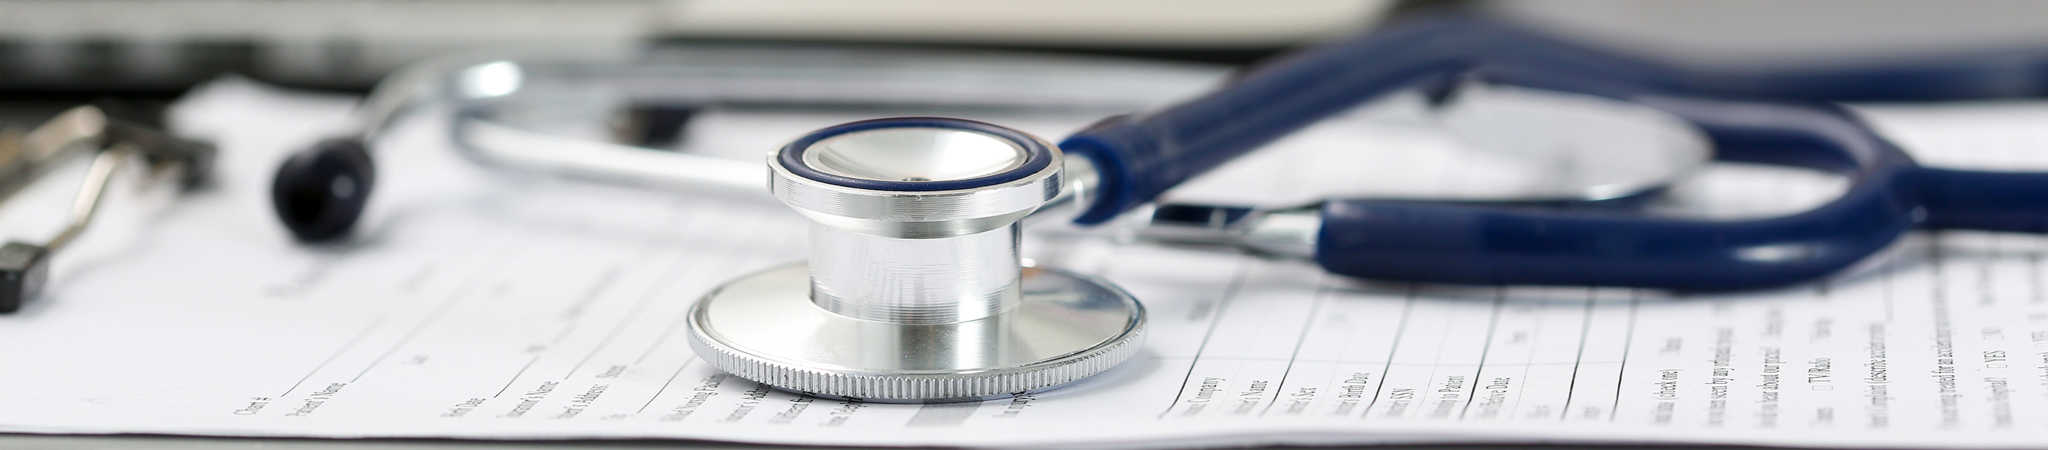 A stethoscope rests on a medical form. This symbolizes personal injury law.